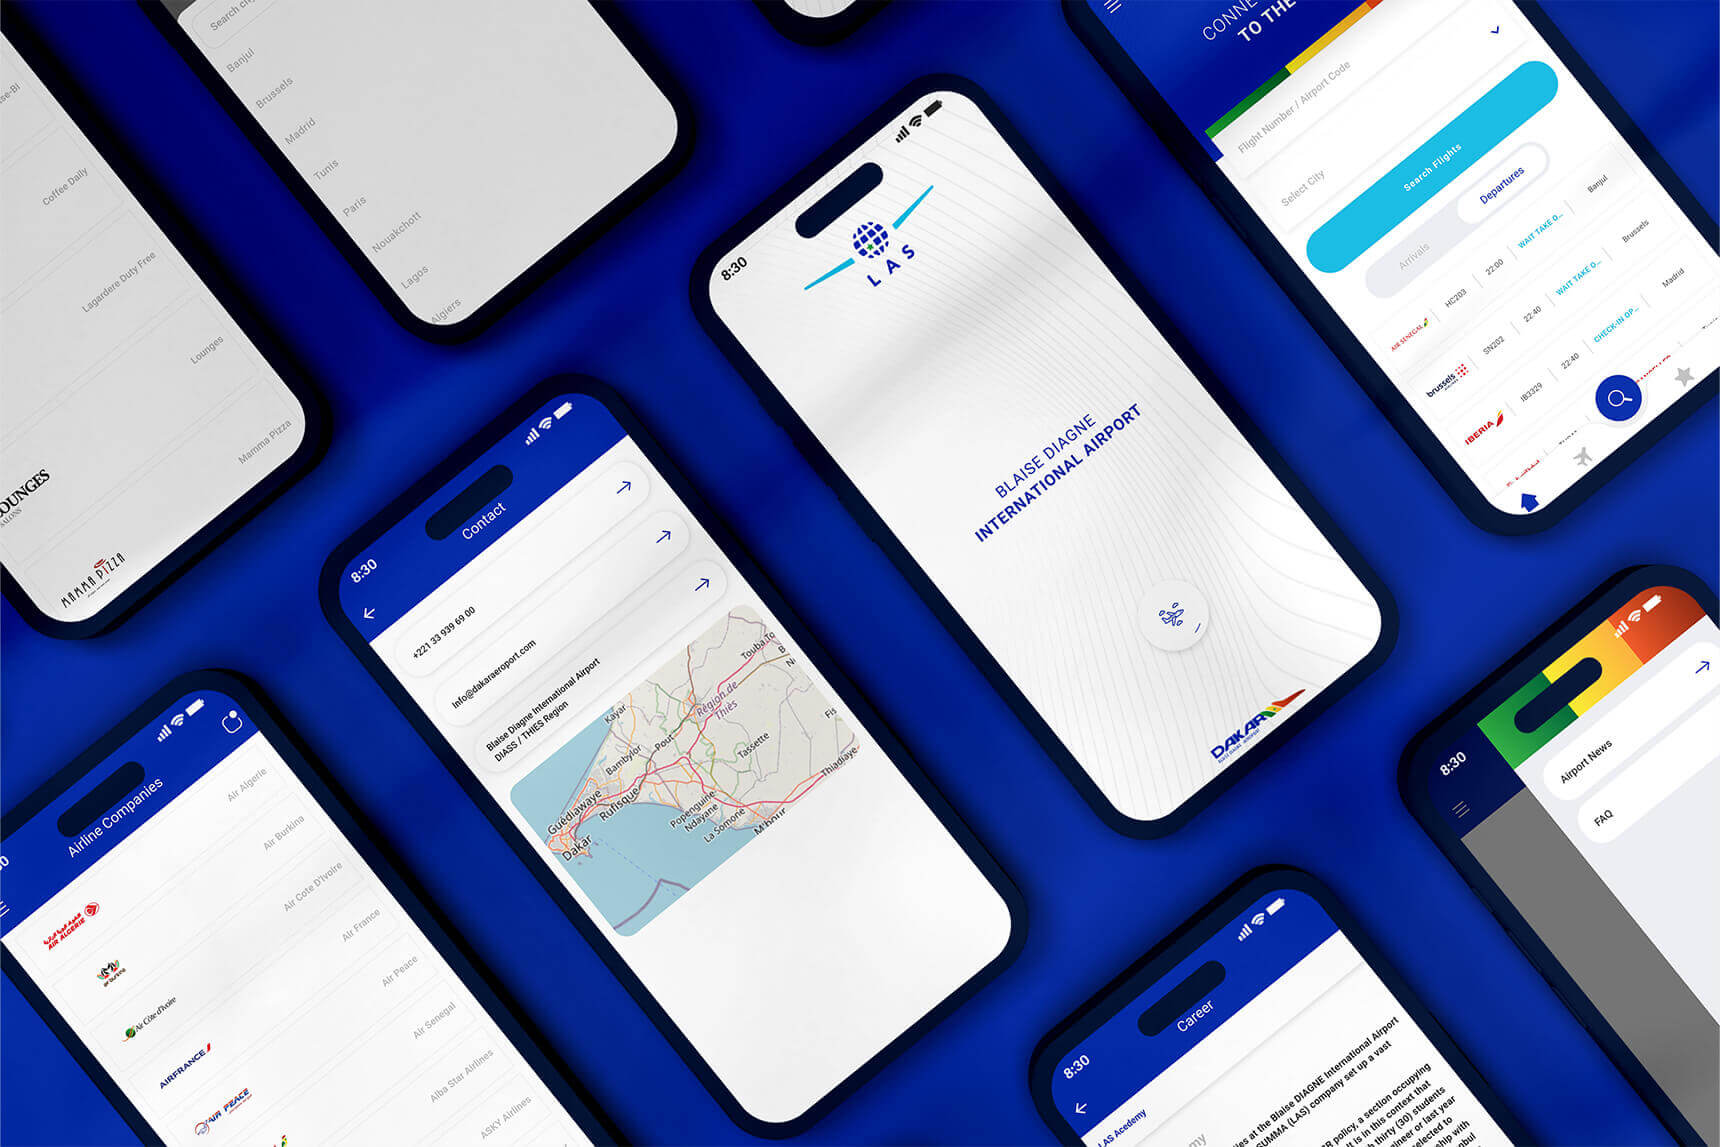 Dakar Aeroport-2 - wrinting 1-3 - web promo-5 - website-page-6 - app-mockup-7- home-page-8 - type-9 - color-10 - web-pages-11 - laptop-mockup-12 - mobil-page-13 - tablet-screen-14 - phone-tablet mockup-15 - web-pages-16 - imac-mockup-17 - web-pages-1-18 - writing app-19 - app-cover-20 - phone-mockup-21 - phone-screen-mockup